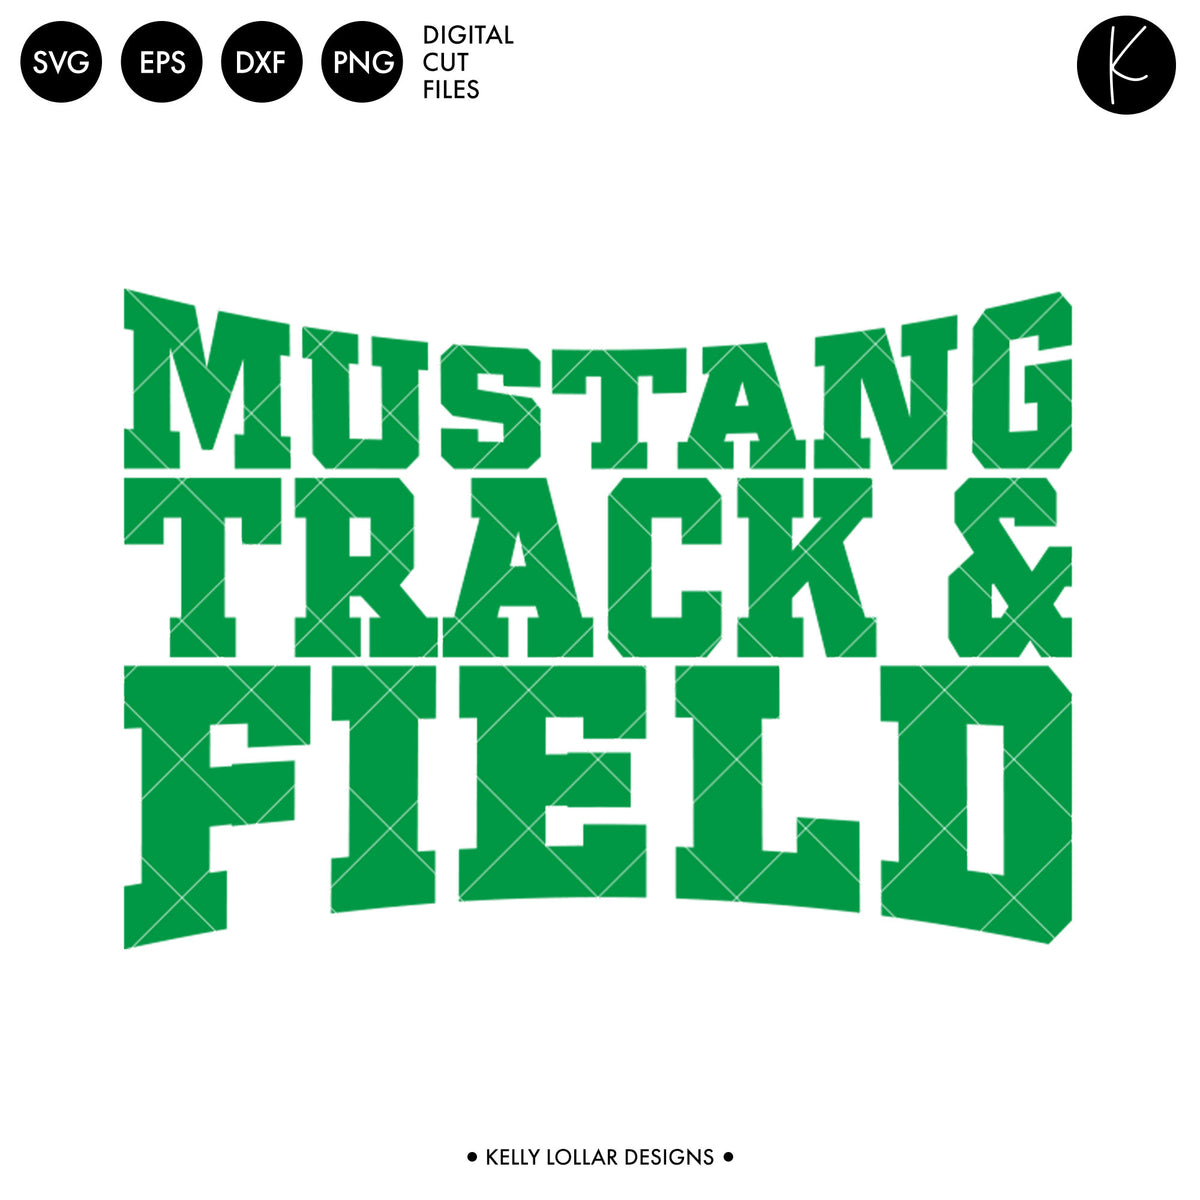 Mustangs Track &amp; Field Bundle | SVG DXF EPS PNG Cut Files